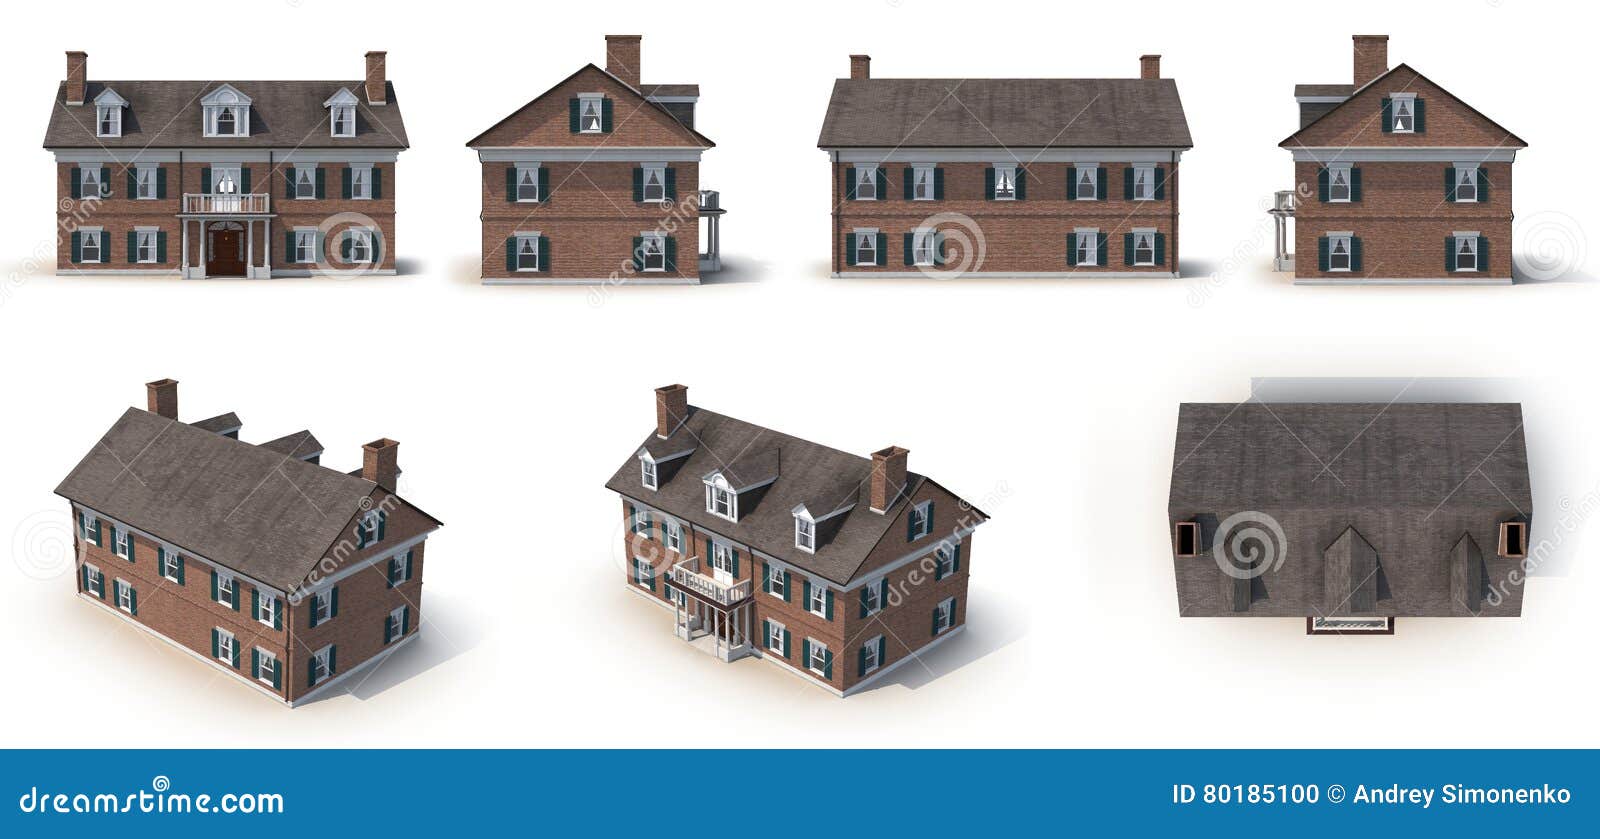 red brick colonial architecture style renders set from different angles on a white. 3d 